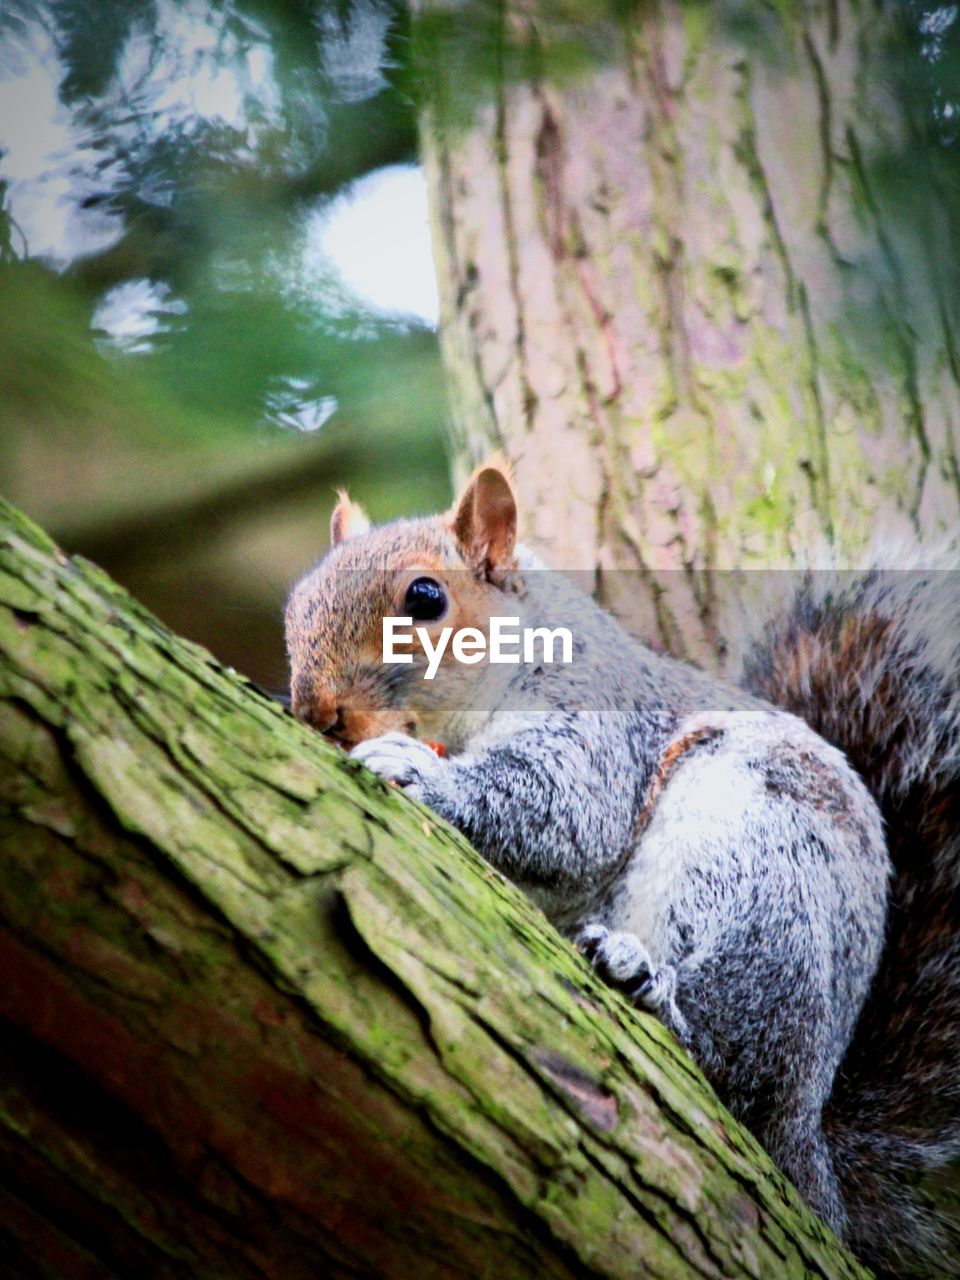 CLOSE-UP OF A SQUIRREL ON TREE TRUNK